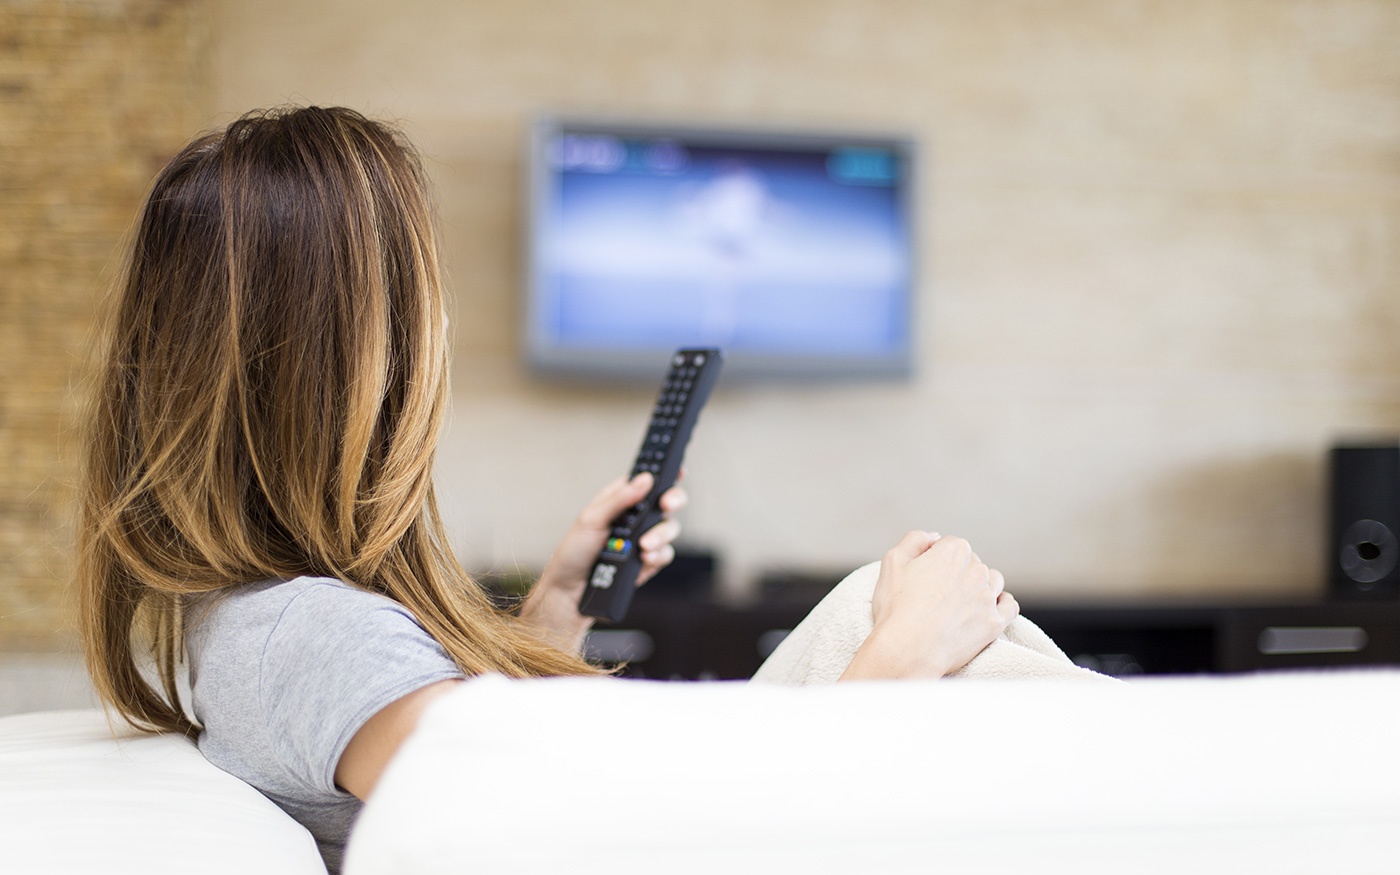 Hotel TV information systems - is this the end?